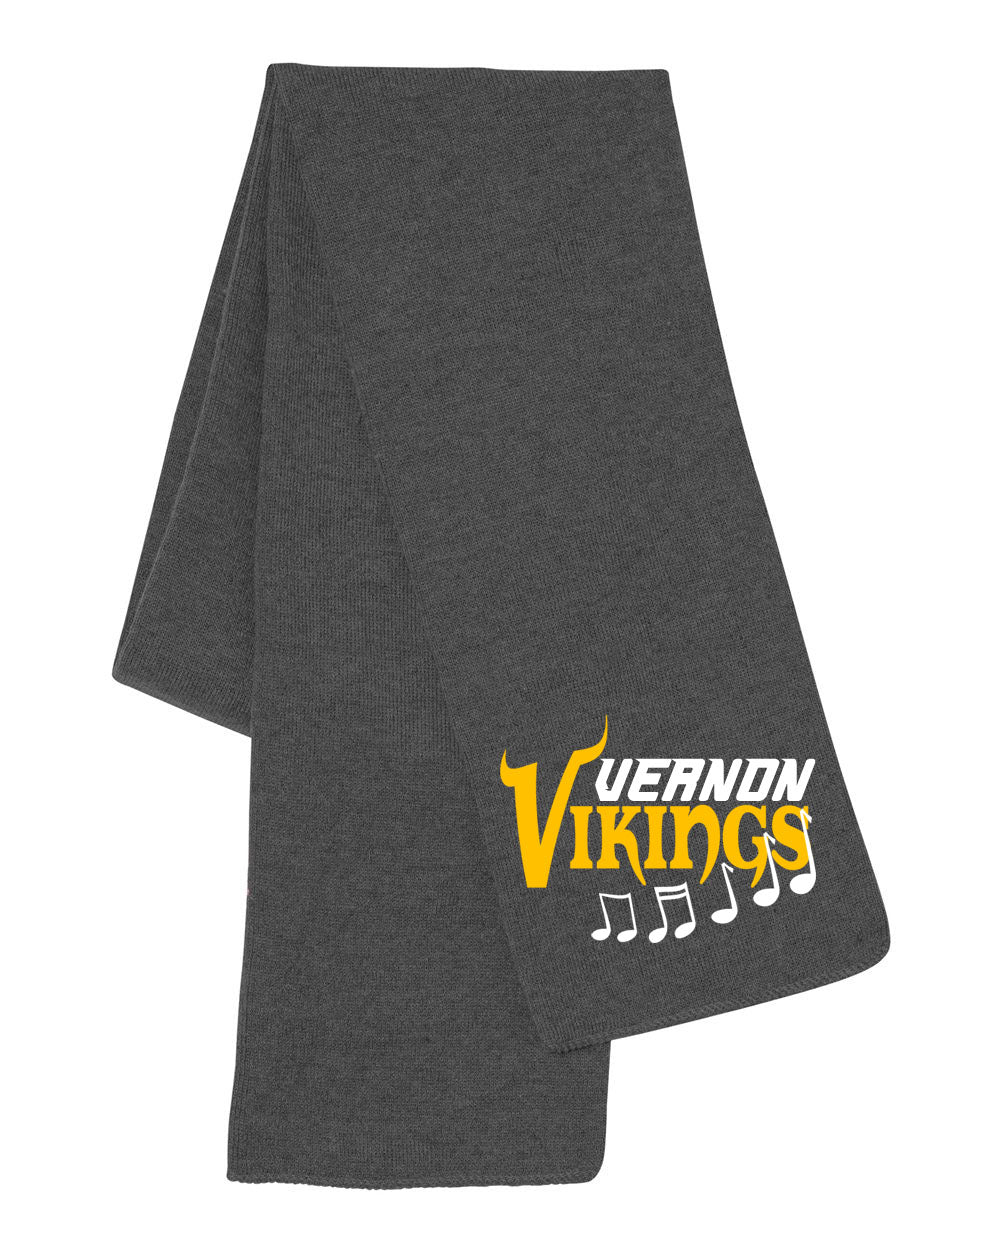 Vernon Marching Band design 2 Scarf